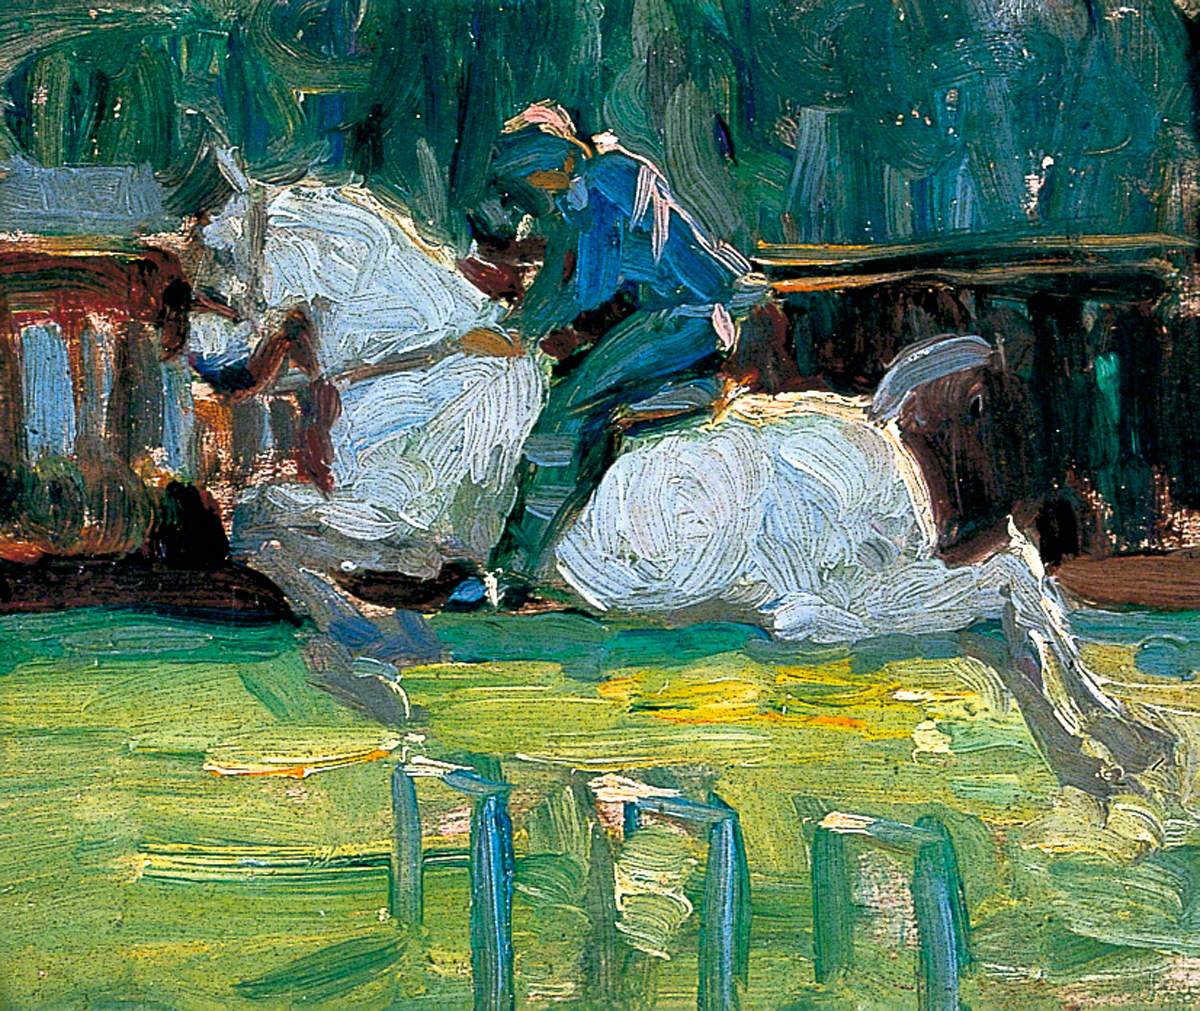 Taking the Fence (before 1926)